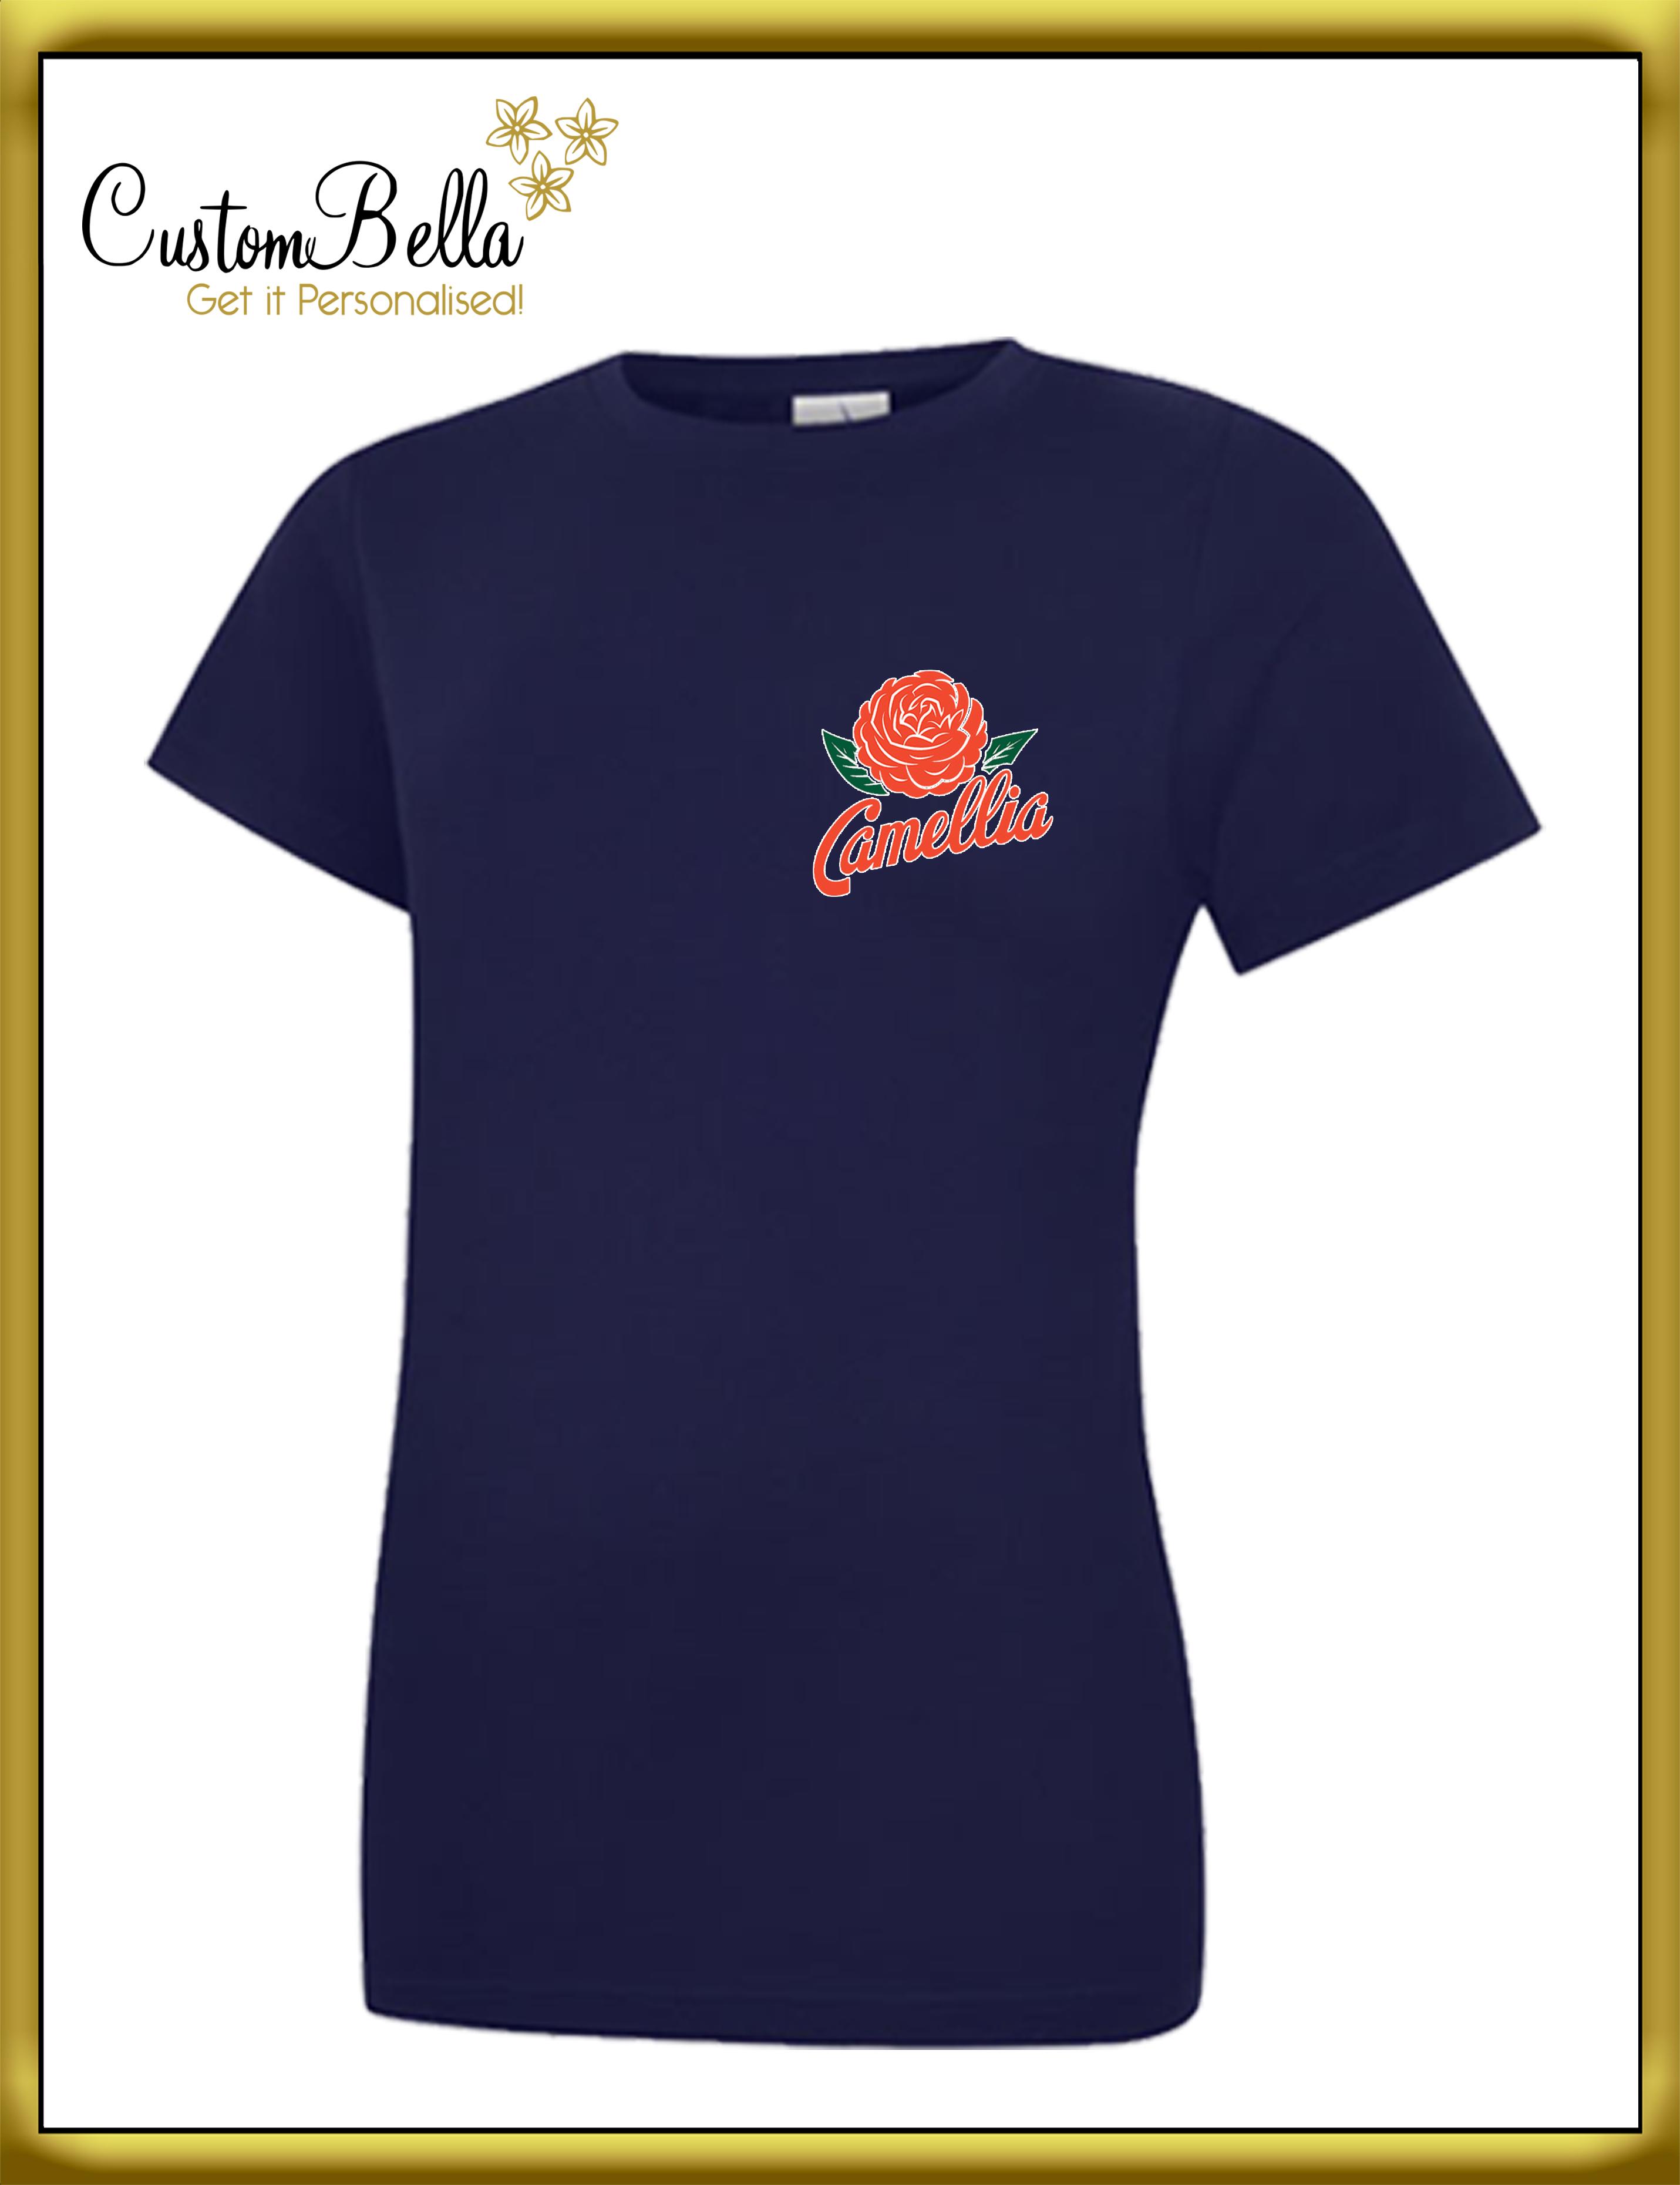 Embroidered Women's T-shirt navy